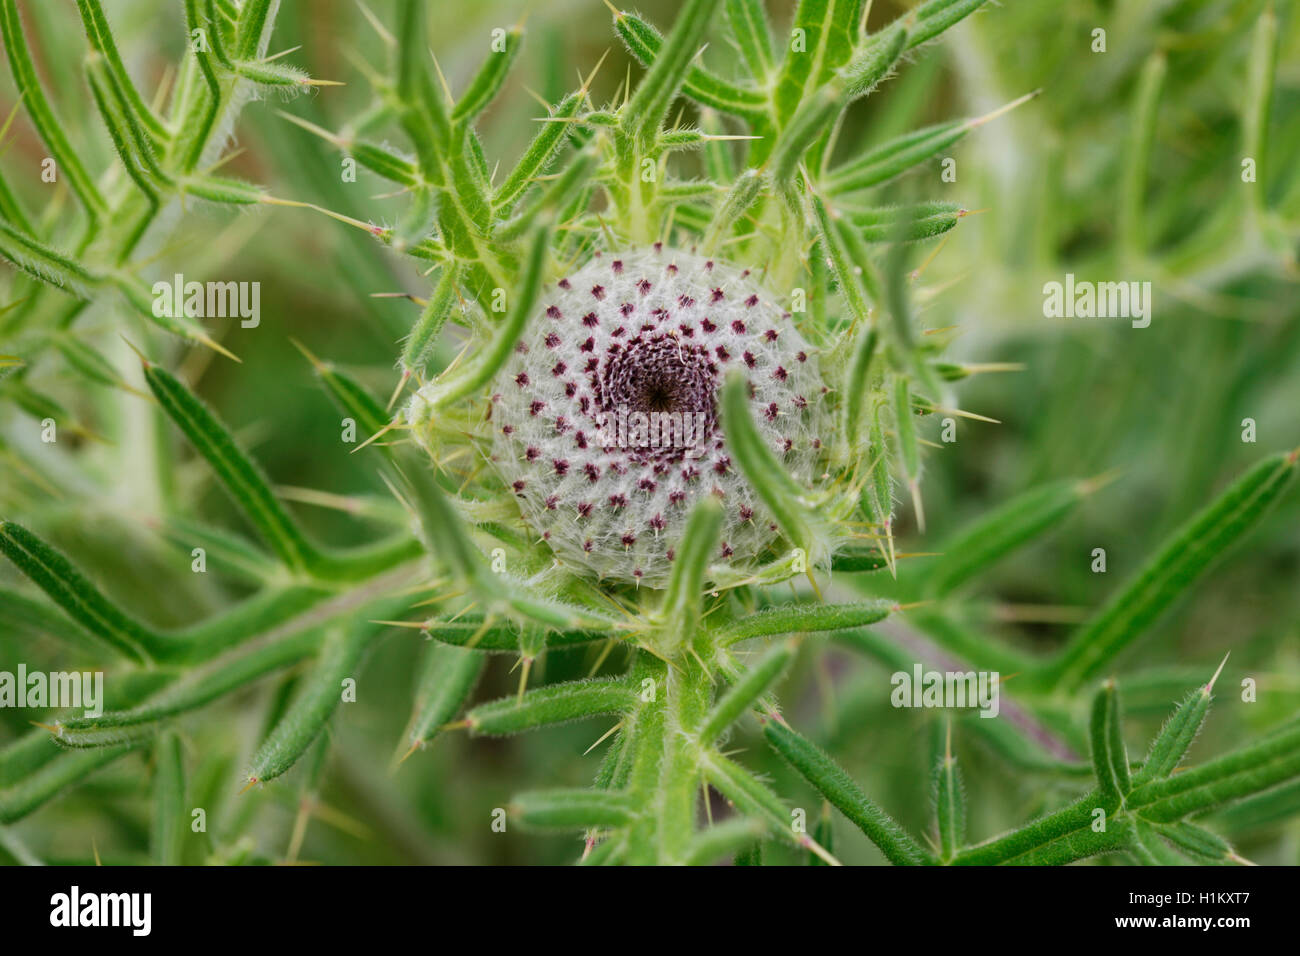 thistle wildflower with a spiralling center and spiky leaves Jane Ann Butler Photography JABP1361 Stock Photo